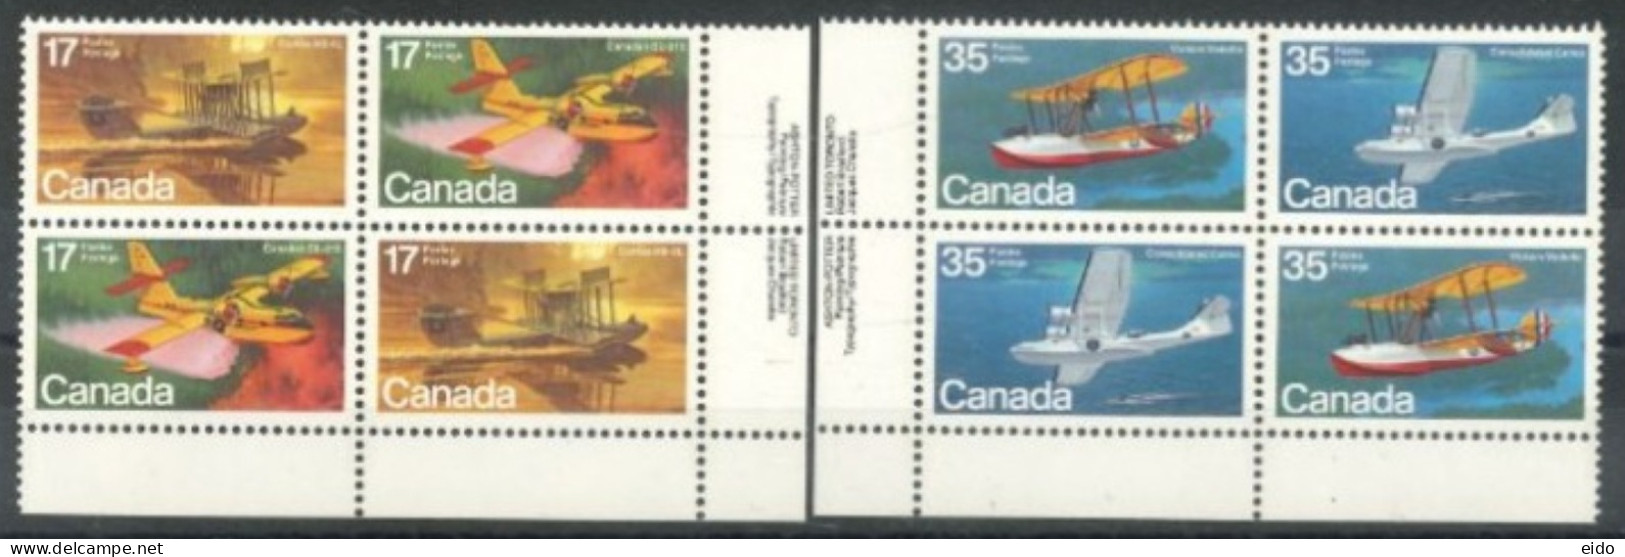 CANADA - 1979, CANADIAN AIRCRAFT (FIRST SERIES), FLYING BOATS STAMPS COMPLETE SET OF 4, 2 OF EACH, UMM (**). - Nuovi